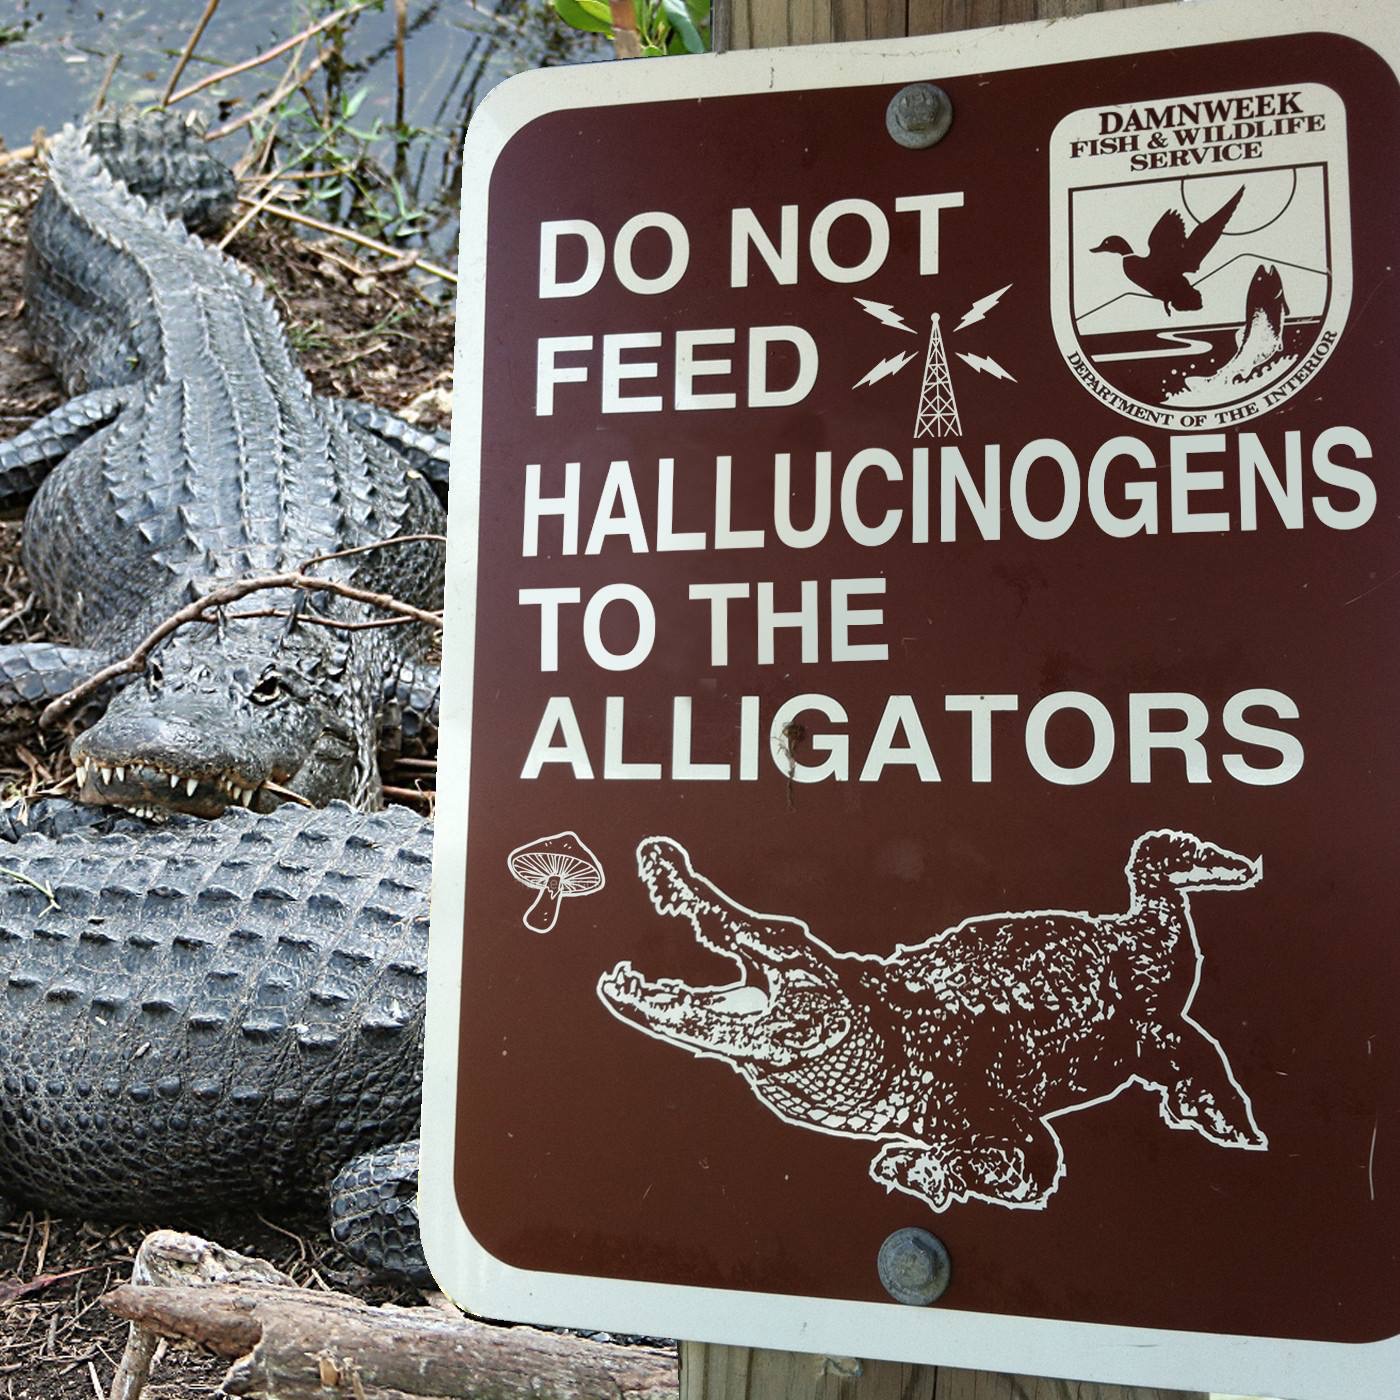 Beware of Tripping Alligators and Fake Warning Signs - Lawhaha.com - Andrew McClurg's Legal Humor